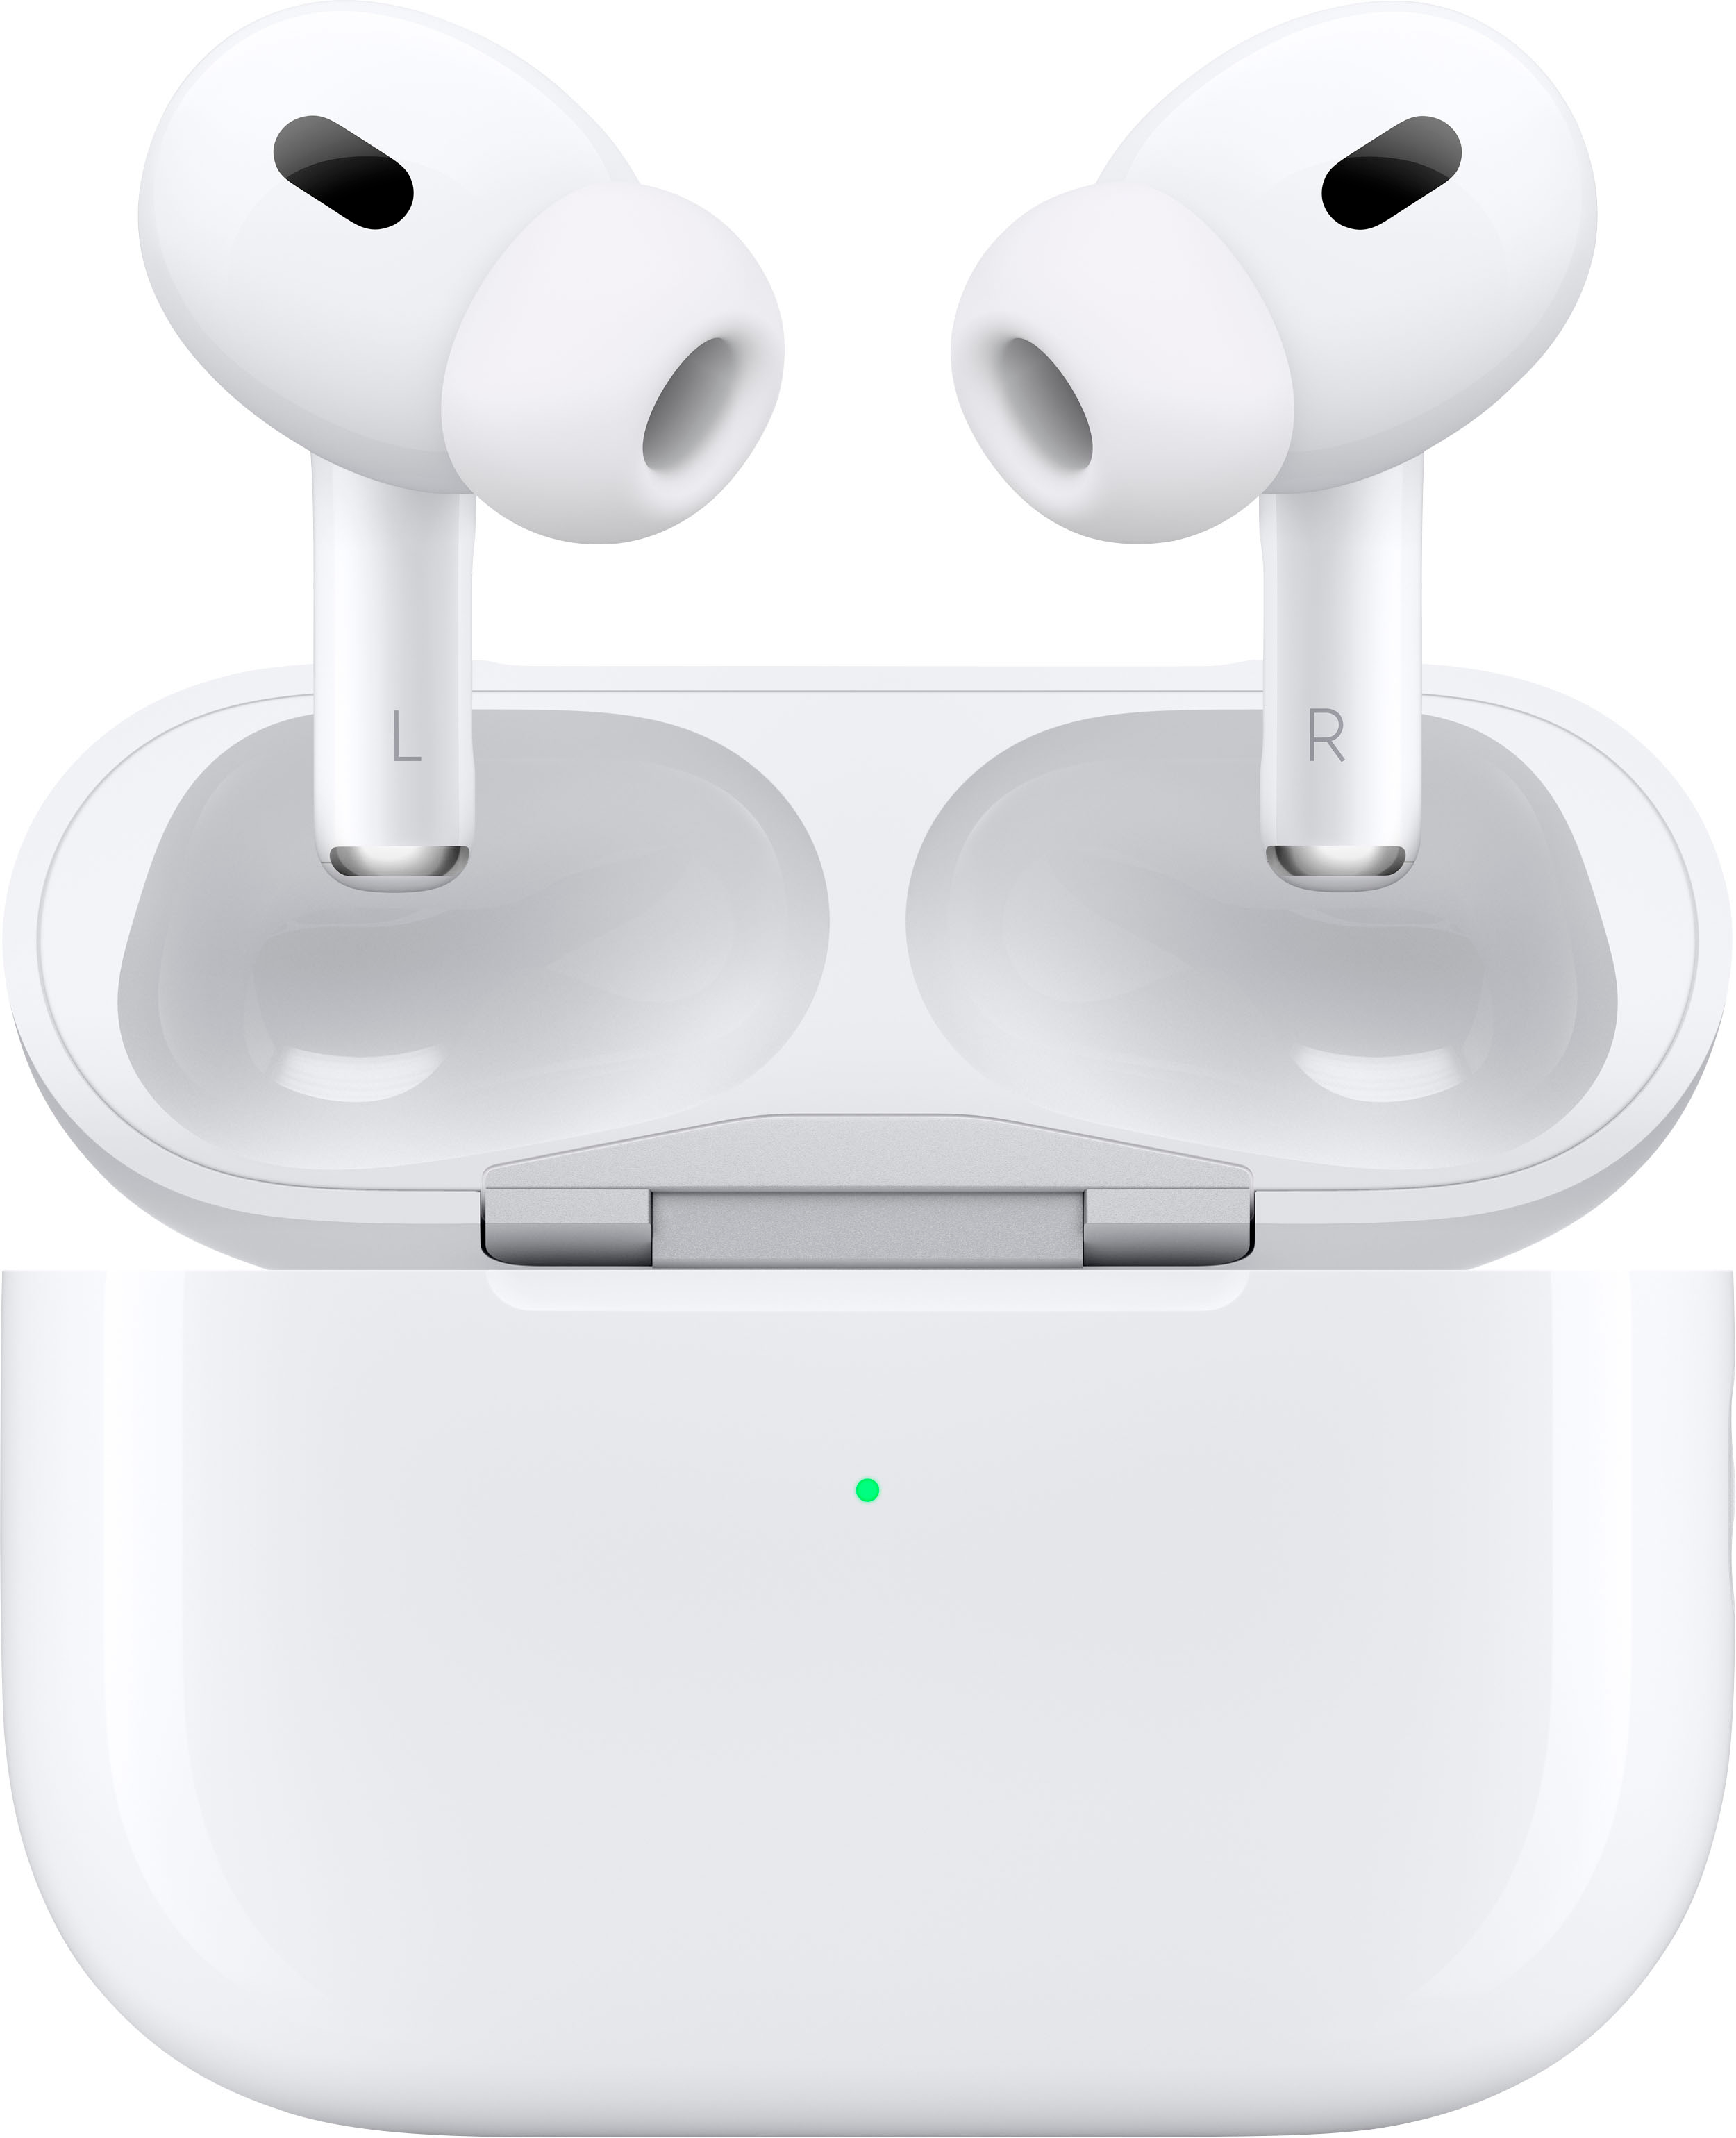 Apple - AirPods Pro (2nd generation) - White $199.99 at Best Buy